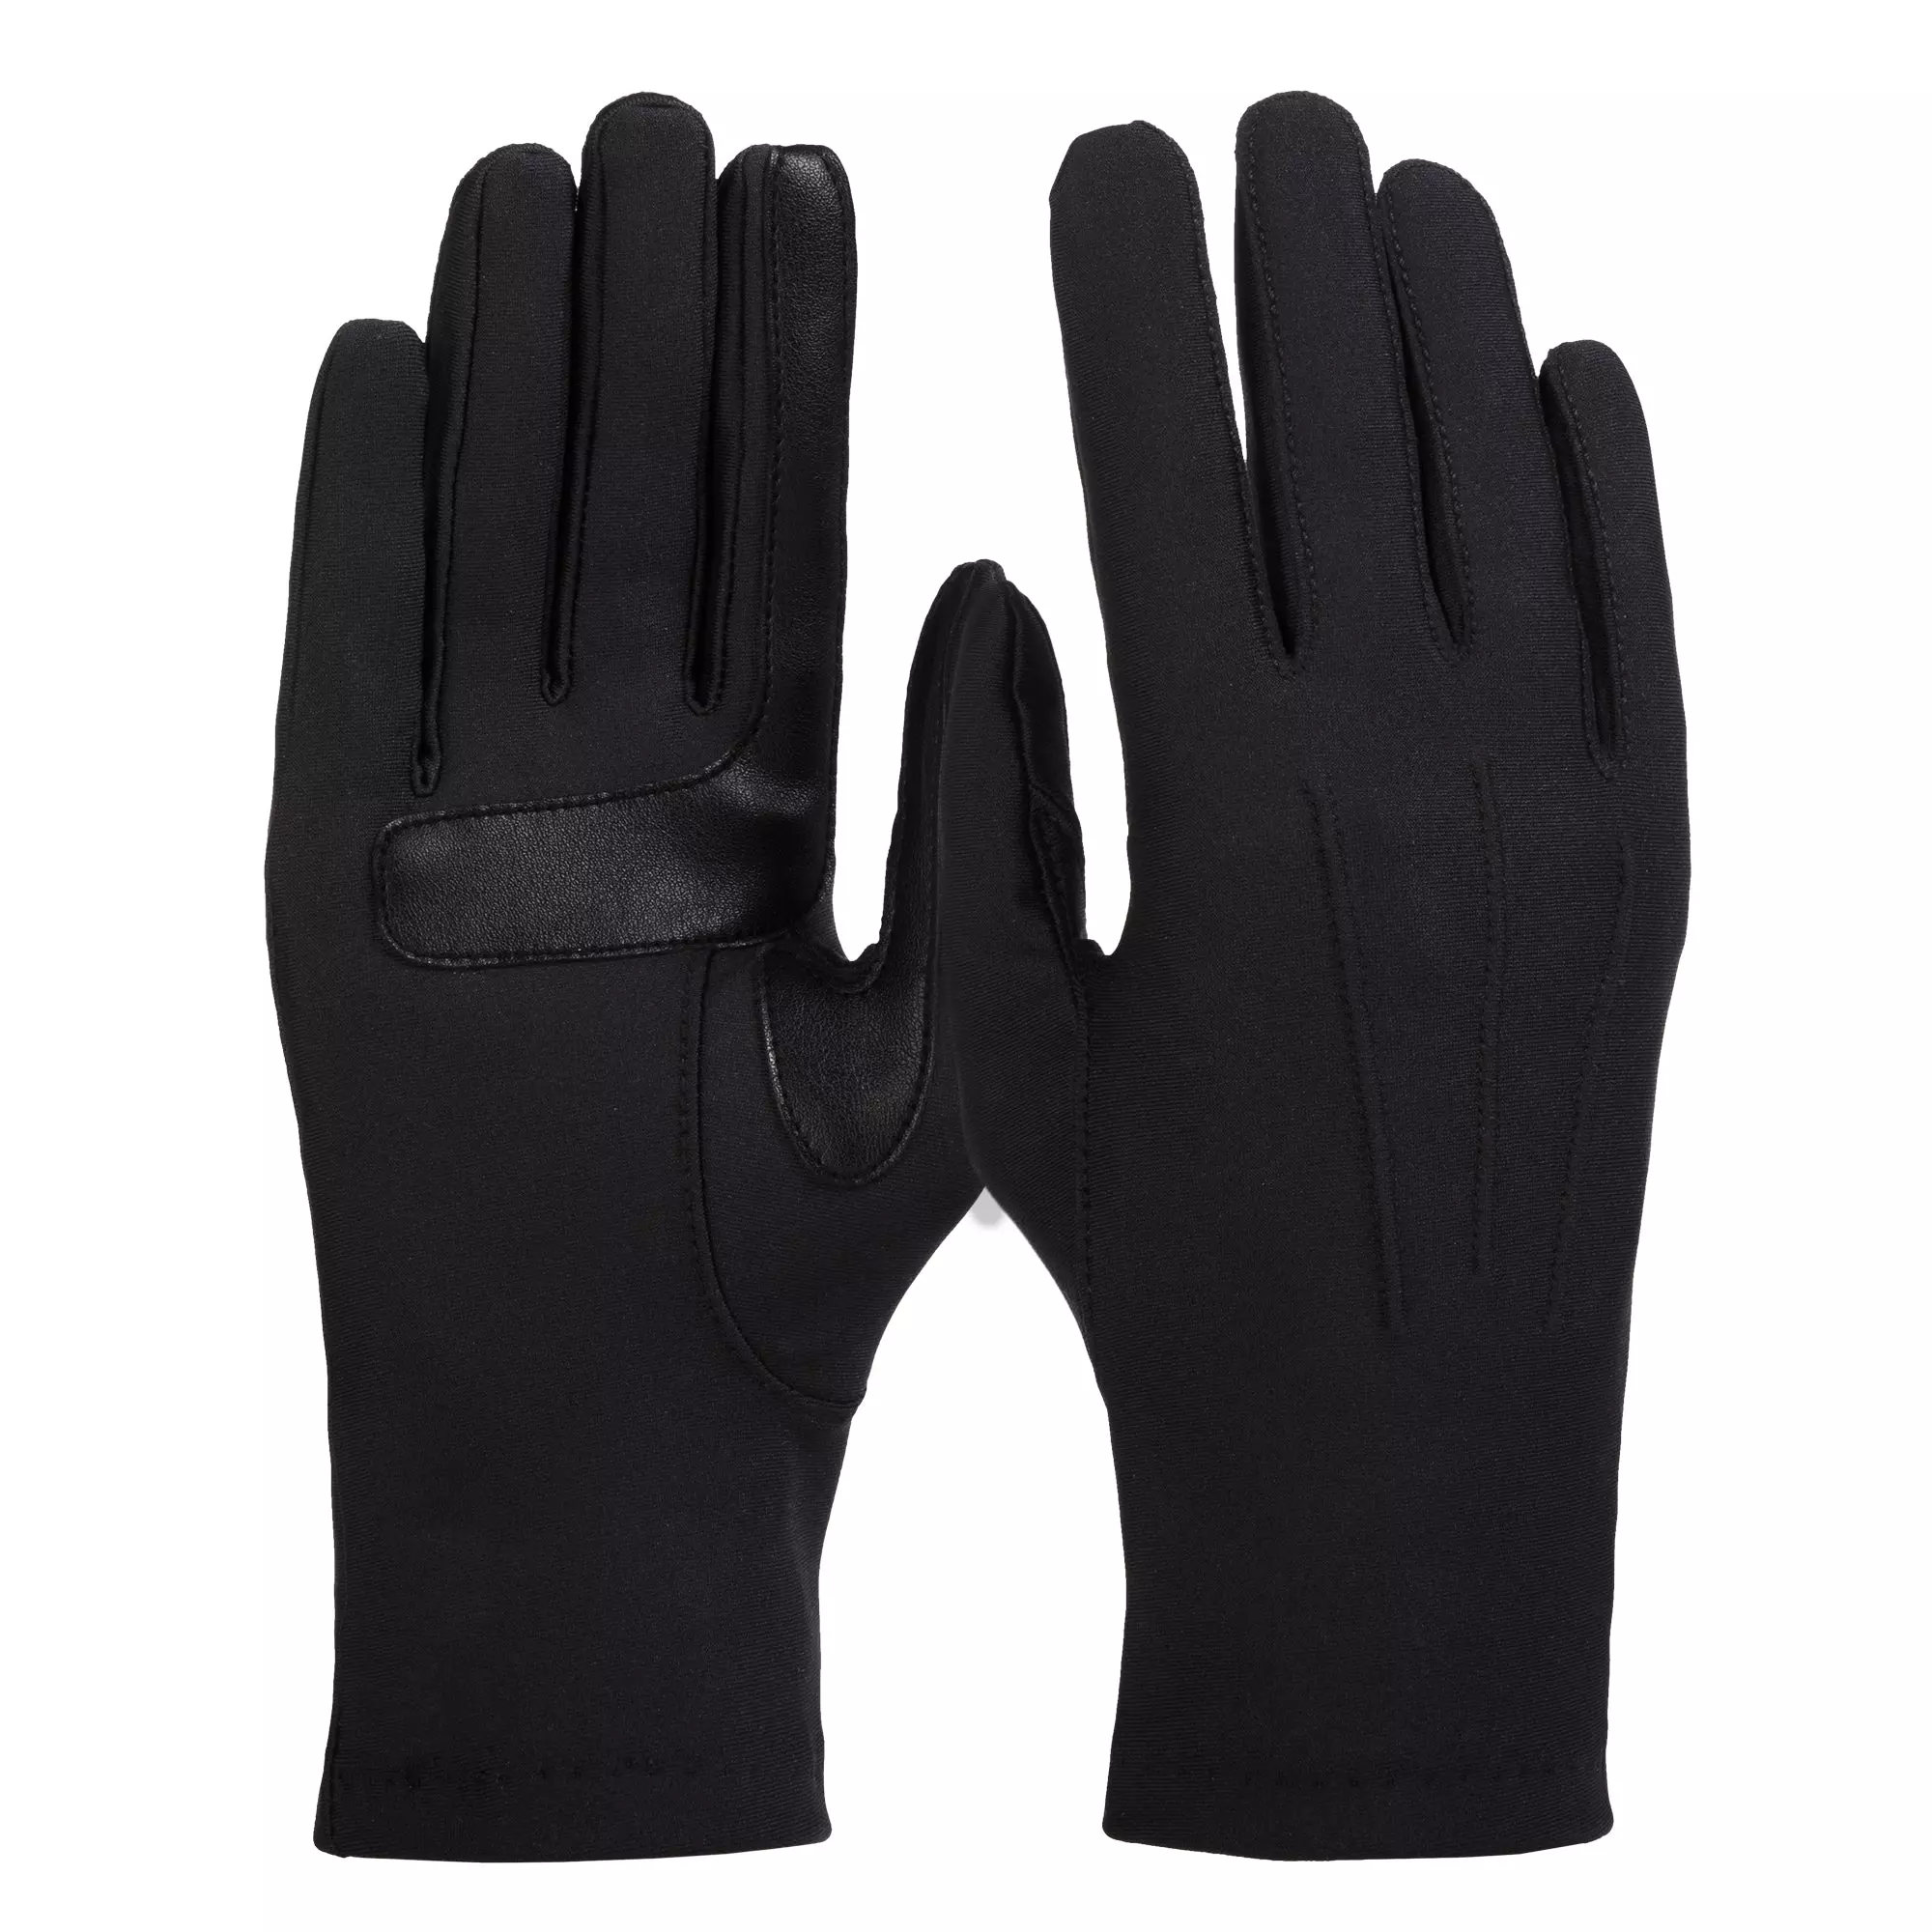 Isotoner Women’s Spandex Gloves With Warm Fleece Lining